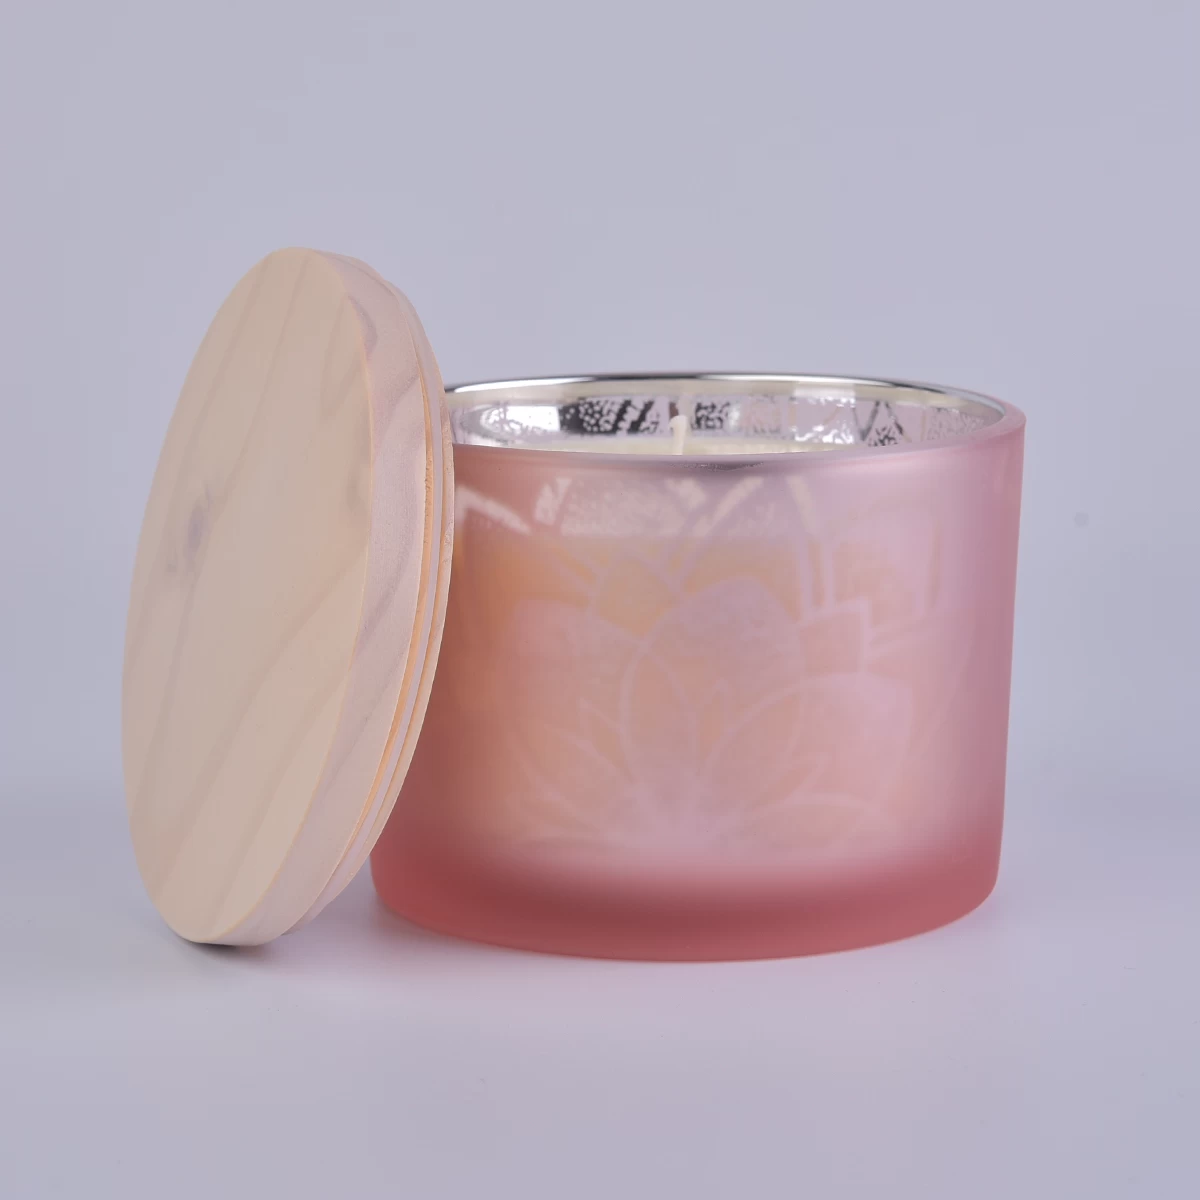 14 oz laser pattern pink glass candle jar with wooden lid